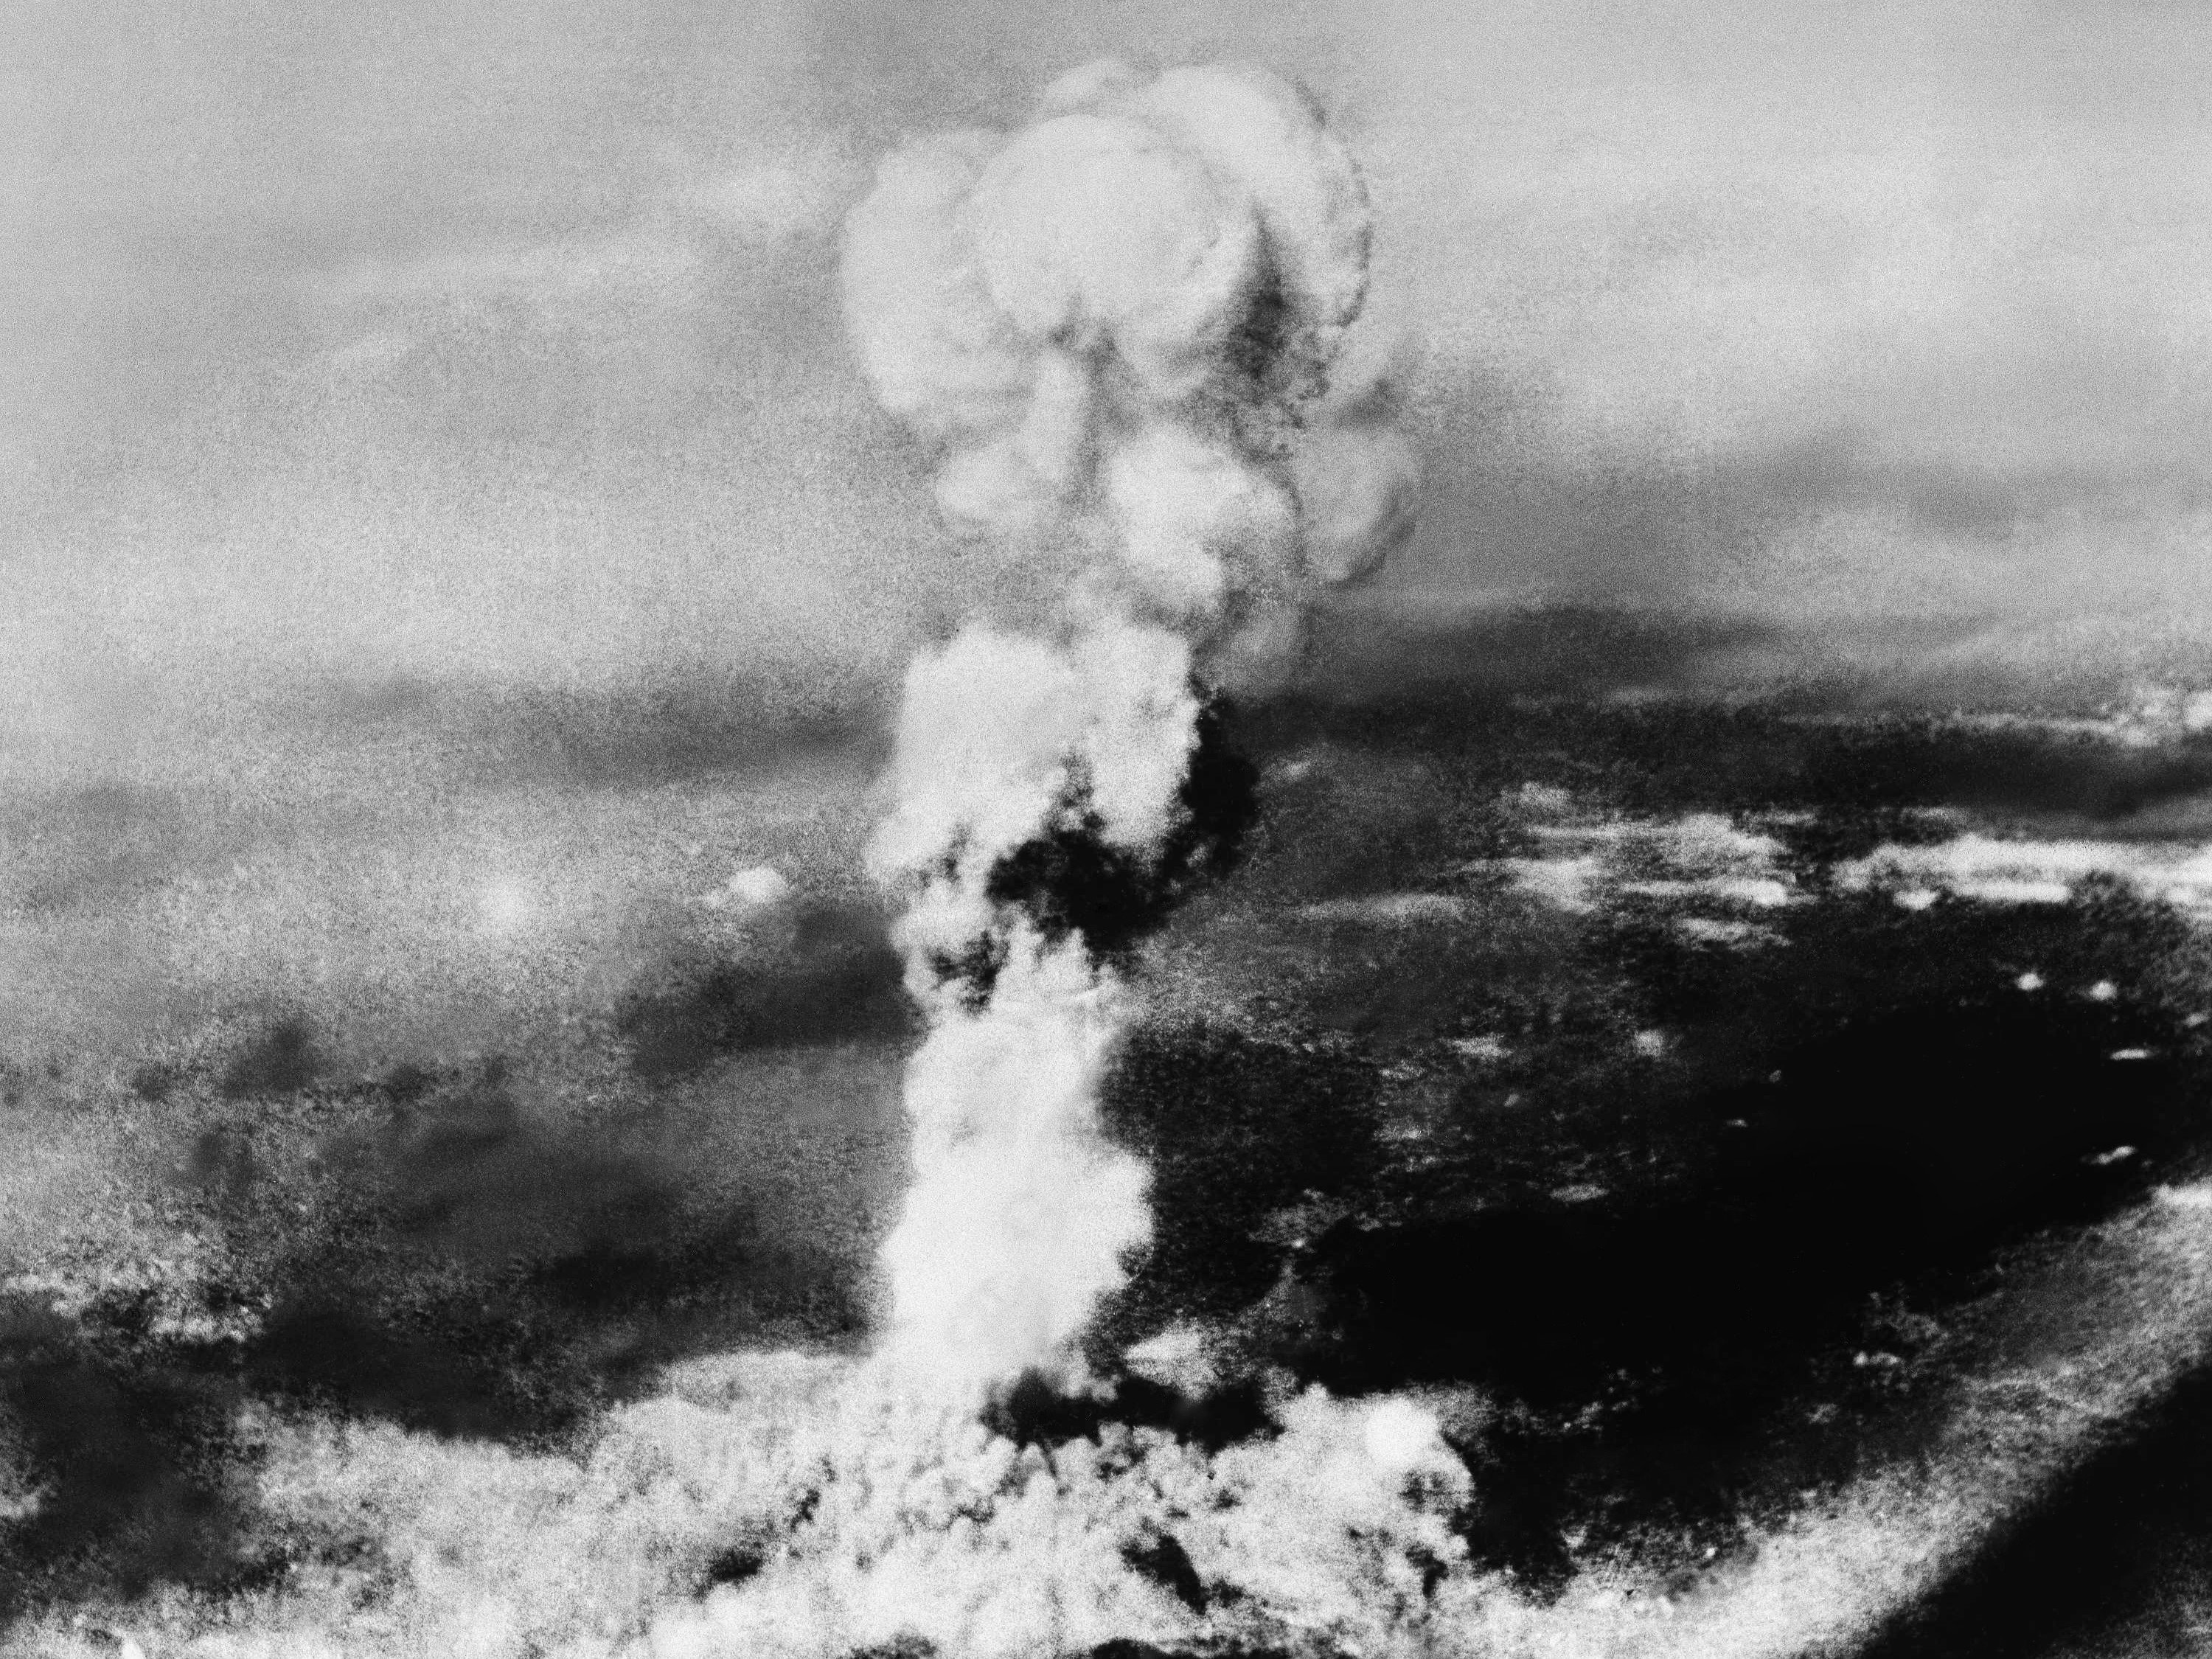 A mushroom cloud rises over the devastated city Hiroshima, Japan, 2–3 minutes after detonation, 6 August 1945, photographed by Technical Sergeant George R. Caron, U.S. Army Air Corps, tail gunner of the B-29 Enola Gay, using a Fairchild Camera and Instrument Company K-20 aerial camera with a 6-3/8" f/4.5, 4" × 5" film negative. (National Archives RG 77-AEC)